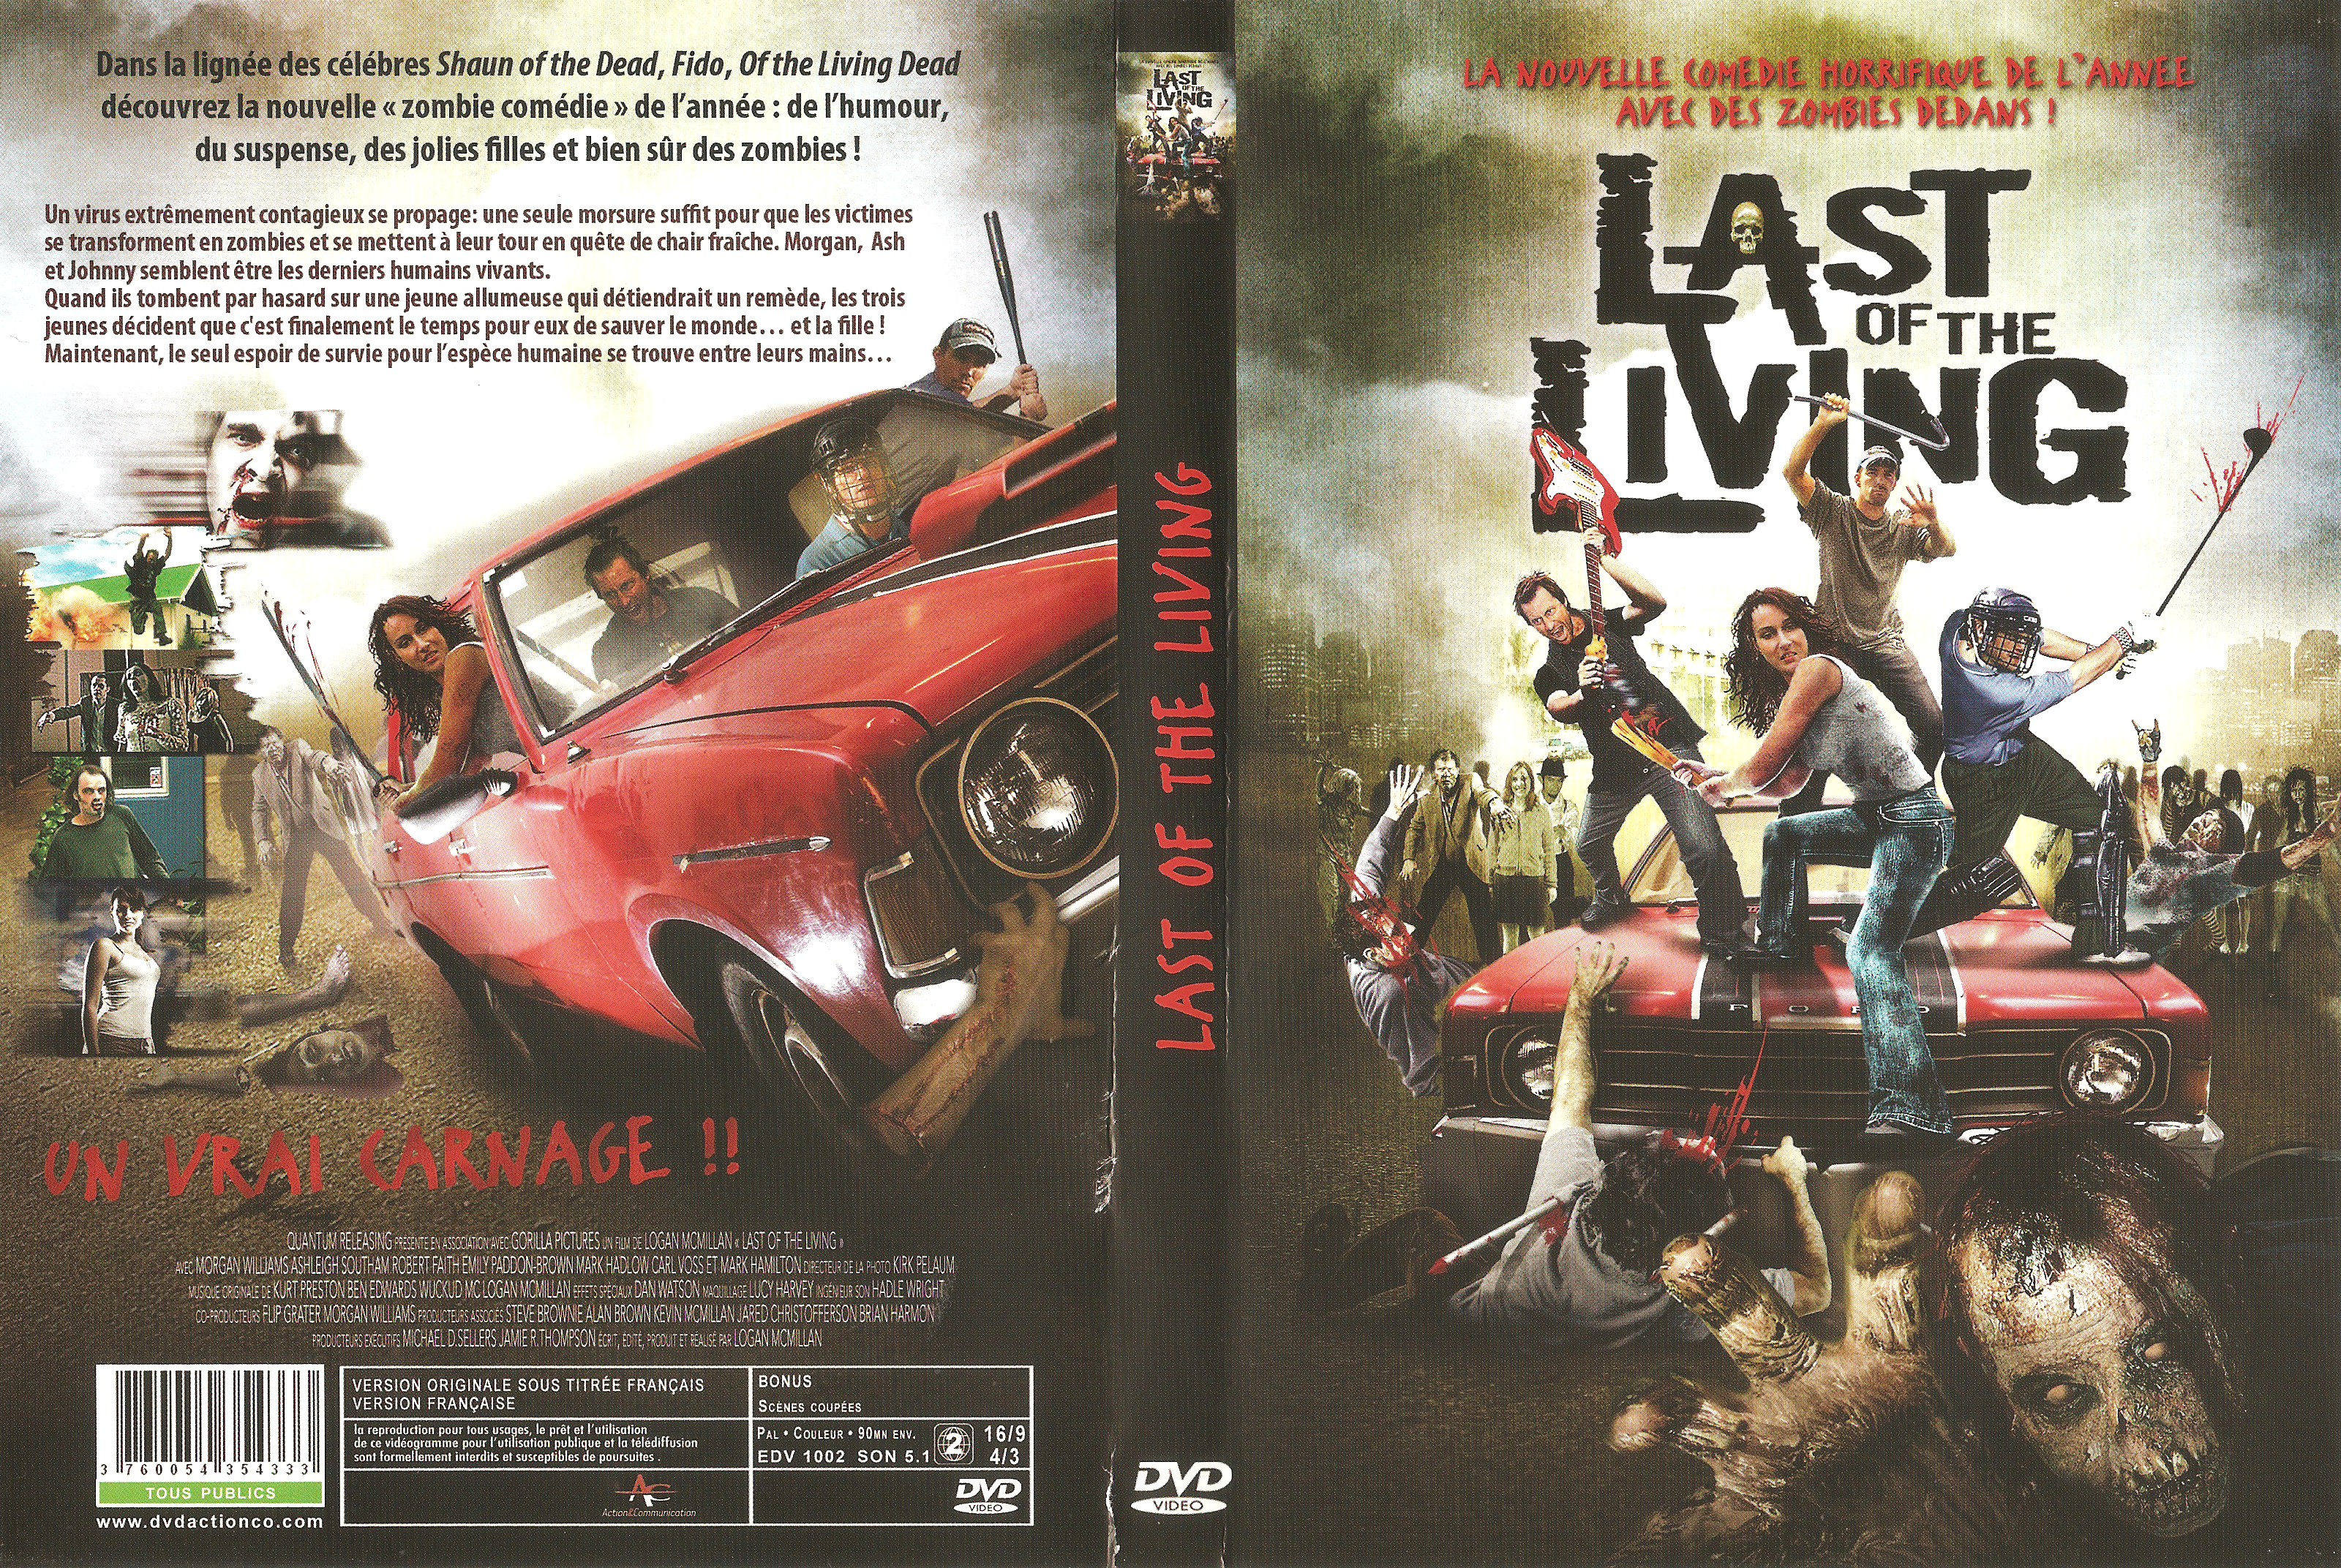 Jaquette DVD Last of the living